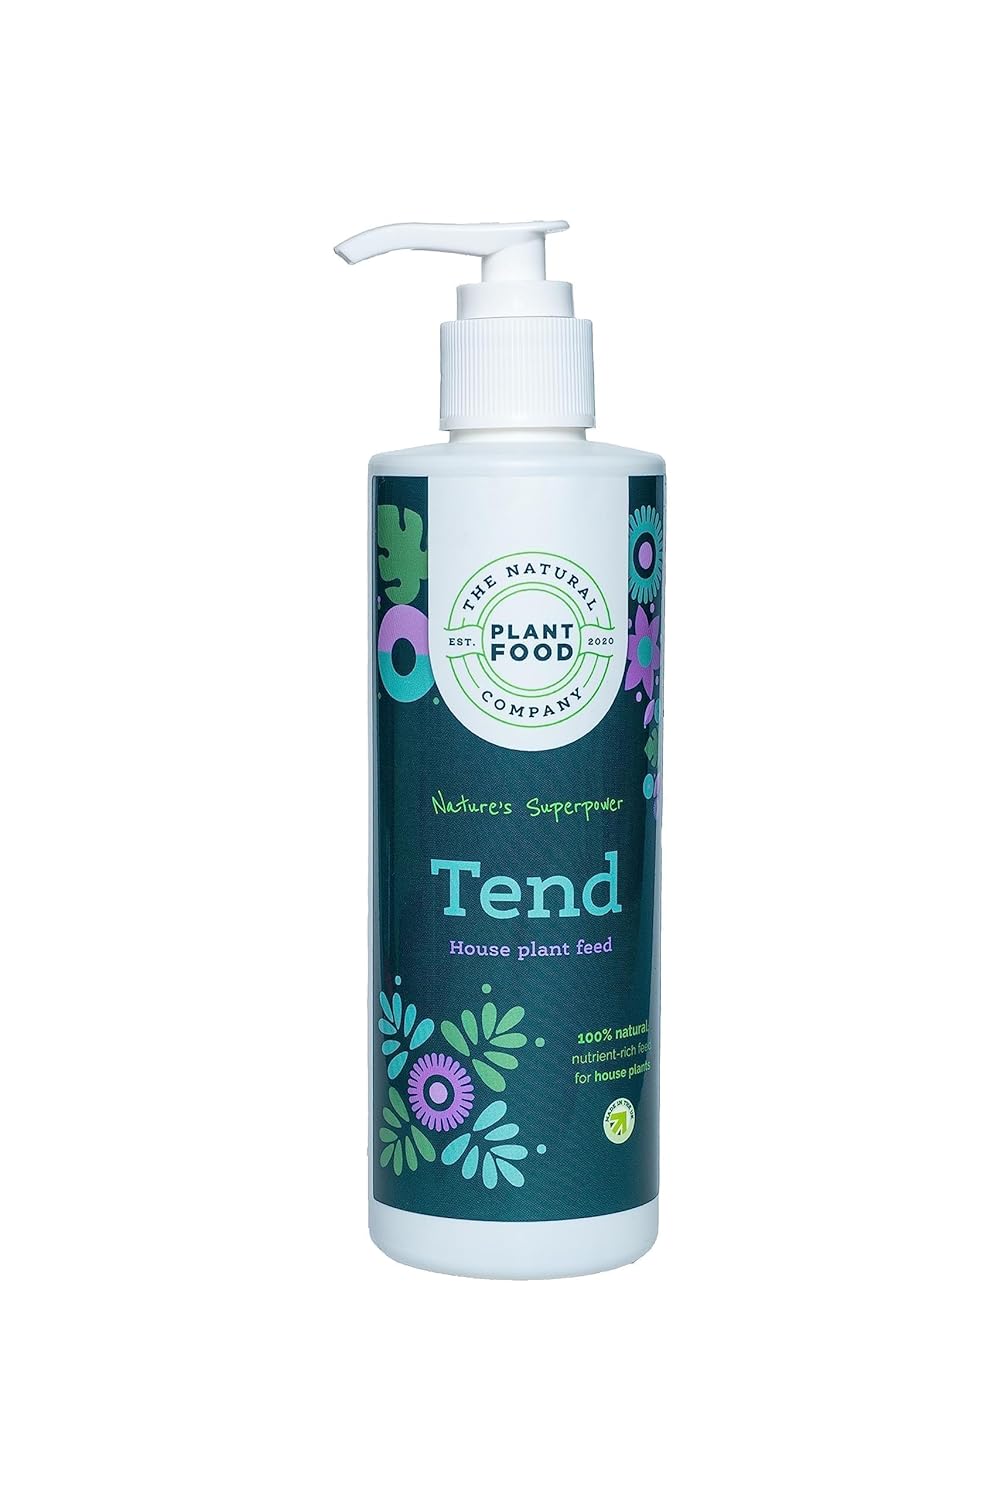 Tend Houseplant Feed - Natural Plant Food Co.